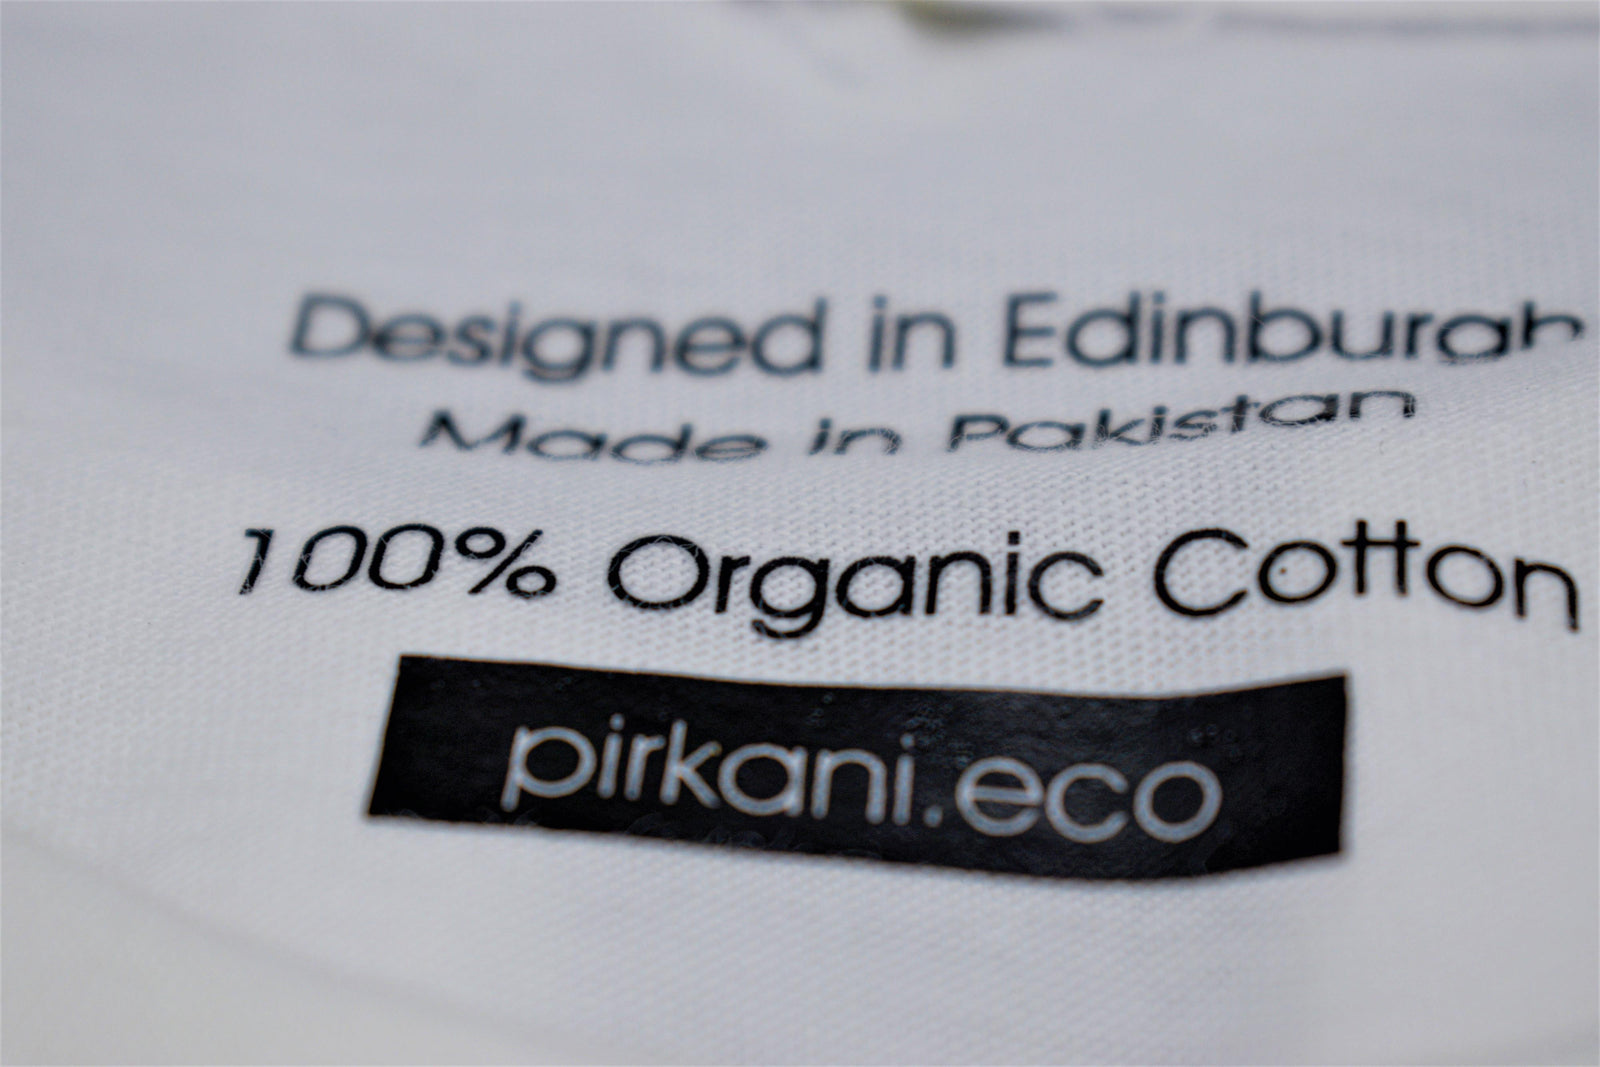 Time to Upgrade Your Wardrobe? Go Green with Sustainable Fashion and Conscious Clothing-PIRKANI